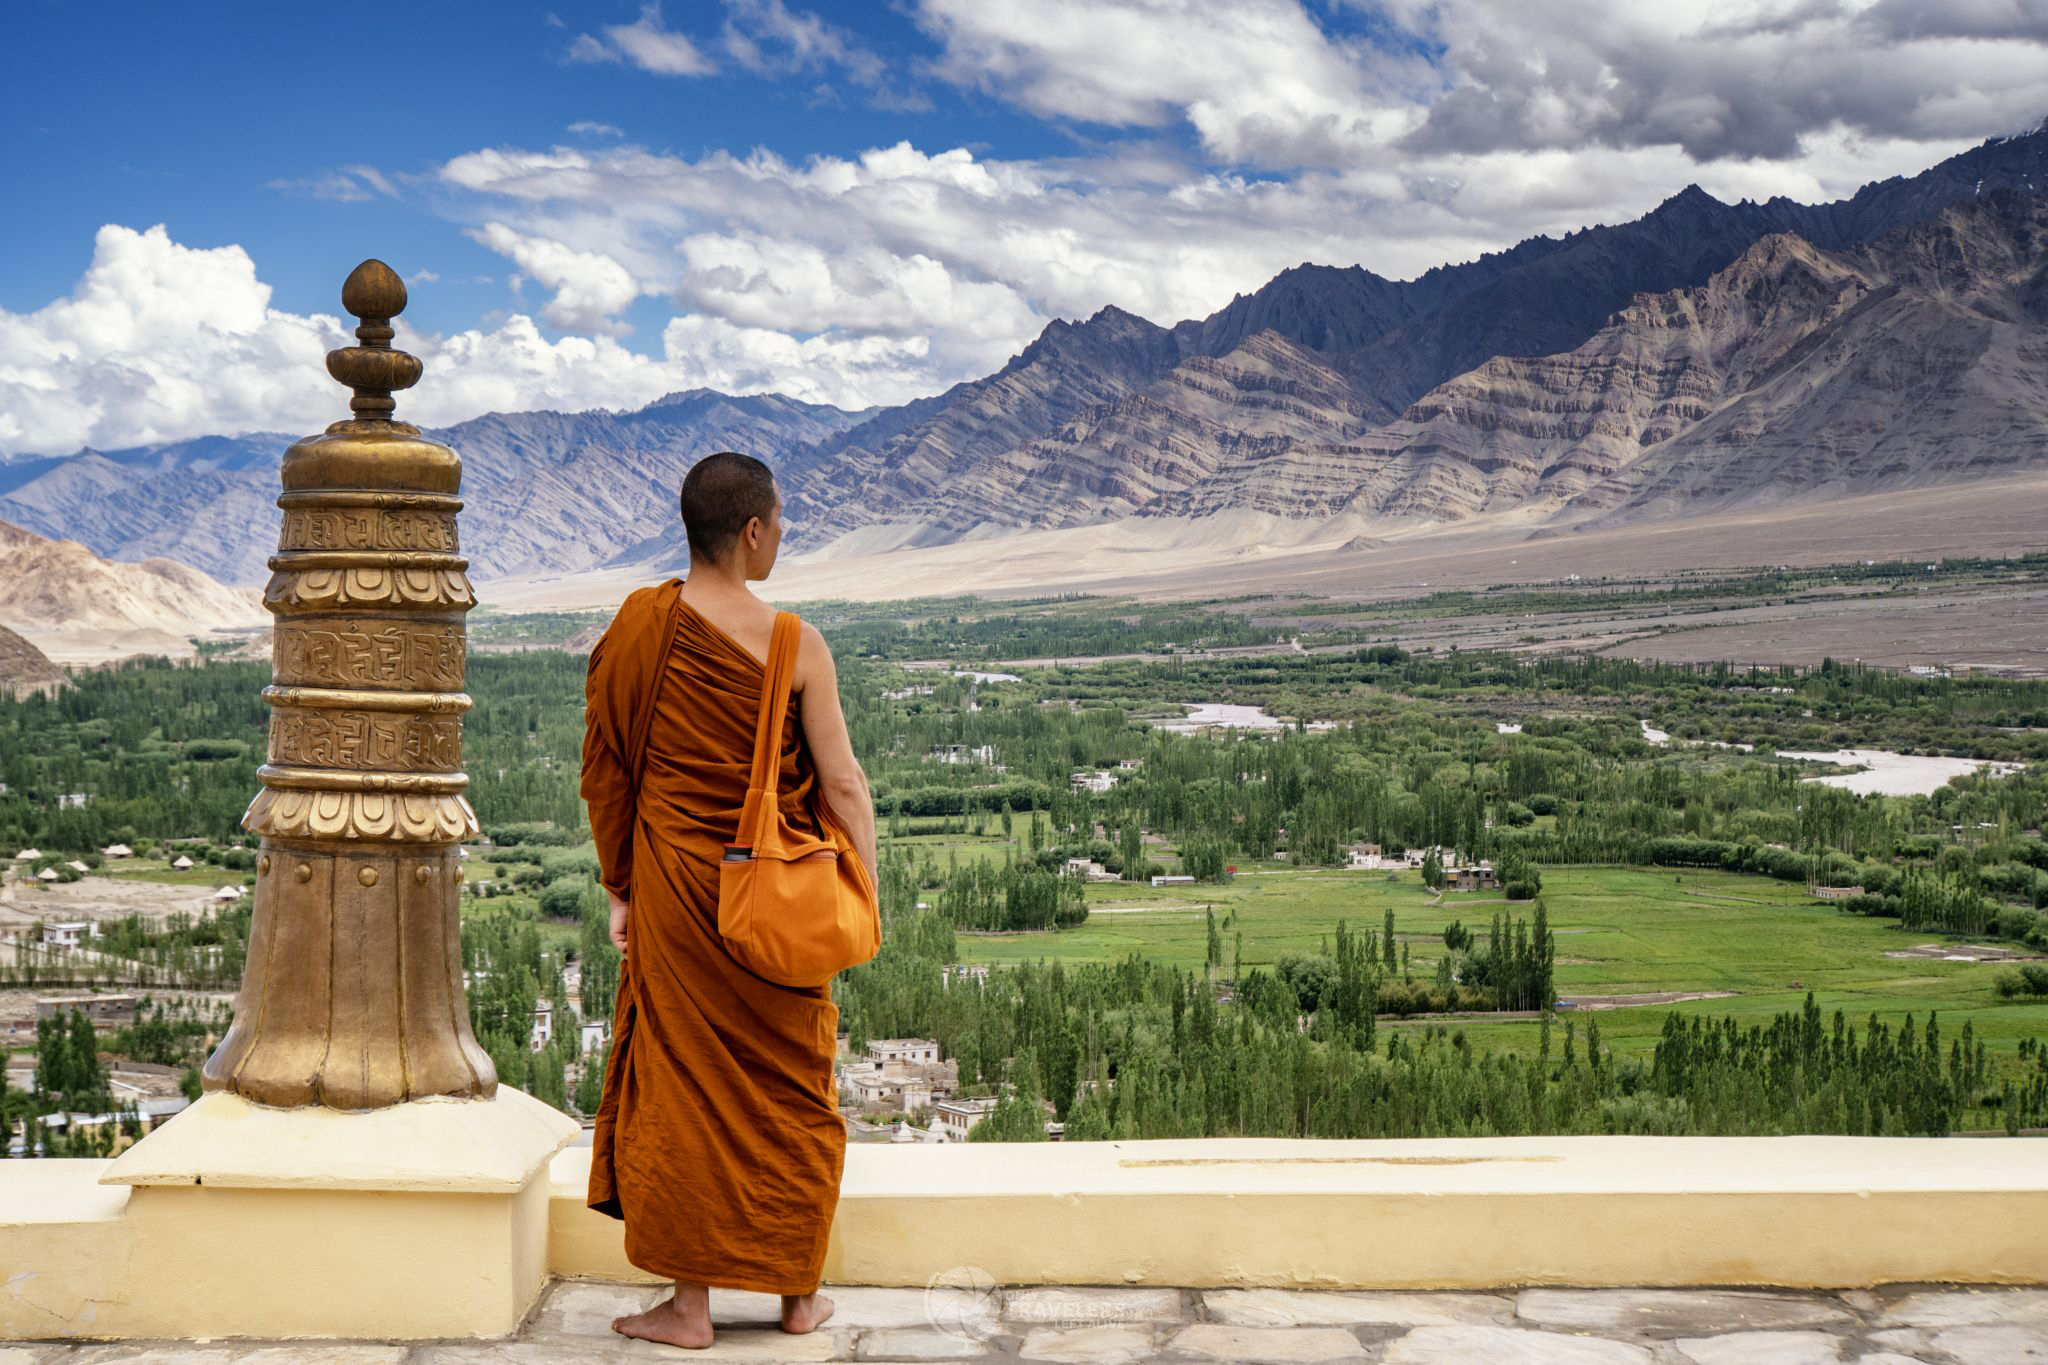 ladakh by only travelers left alive